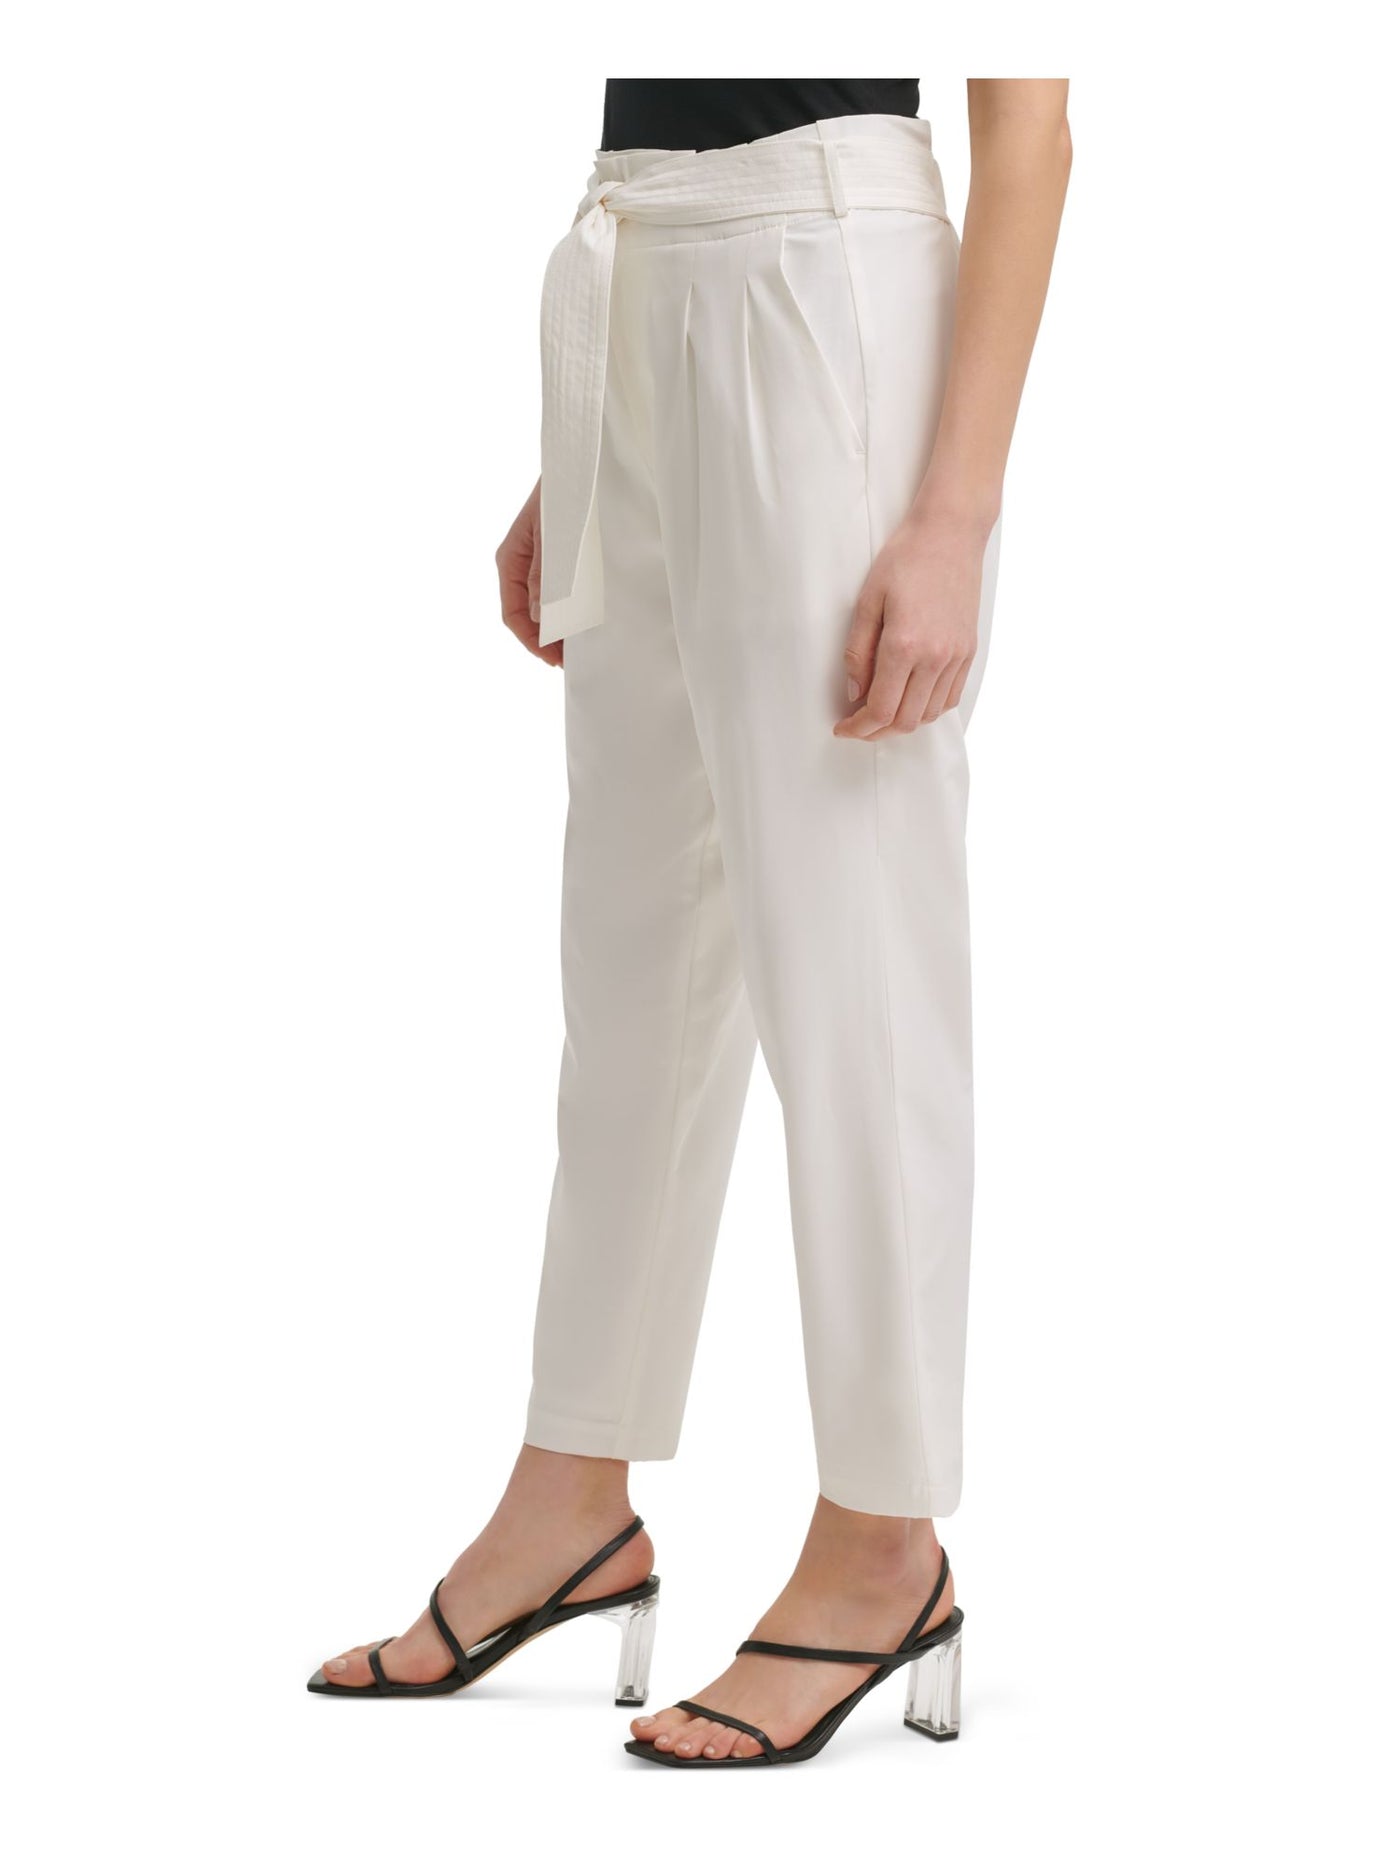 CALVIN KLEIN Womens White Stretch Pocketed Zippered Belted Pleated Ankle Wear To Work Straight leg Pants L